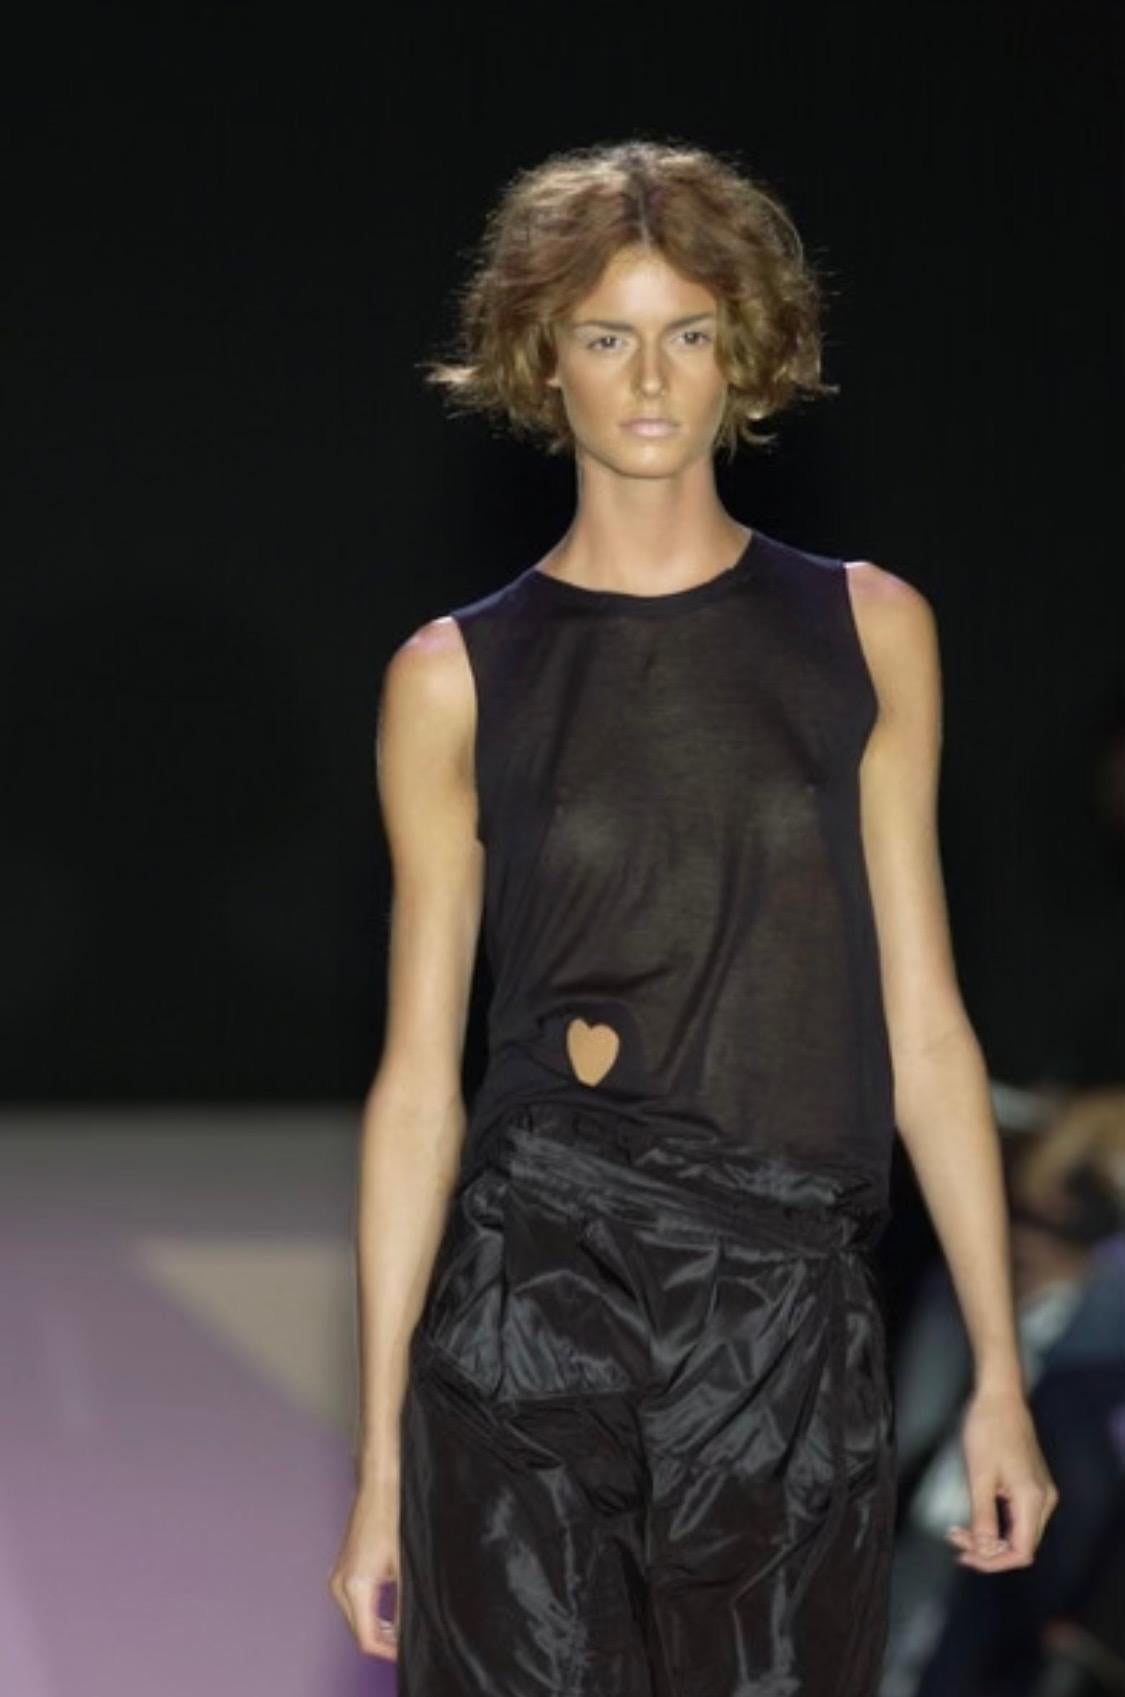 TheRealList presents: a black sleeveless Gucci shirt, designed by Tom Ford. From the Spring/Summer 2002 collection, this top debuted on look 33 modeled by Jacquetta Wheeler with the white version debuting as look 3 modeled by Abbey Shaine. This